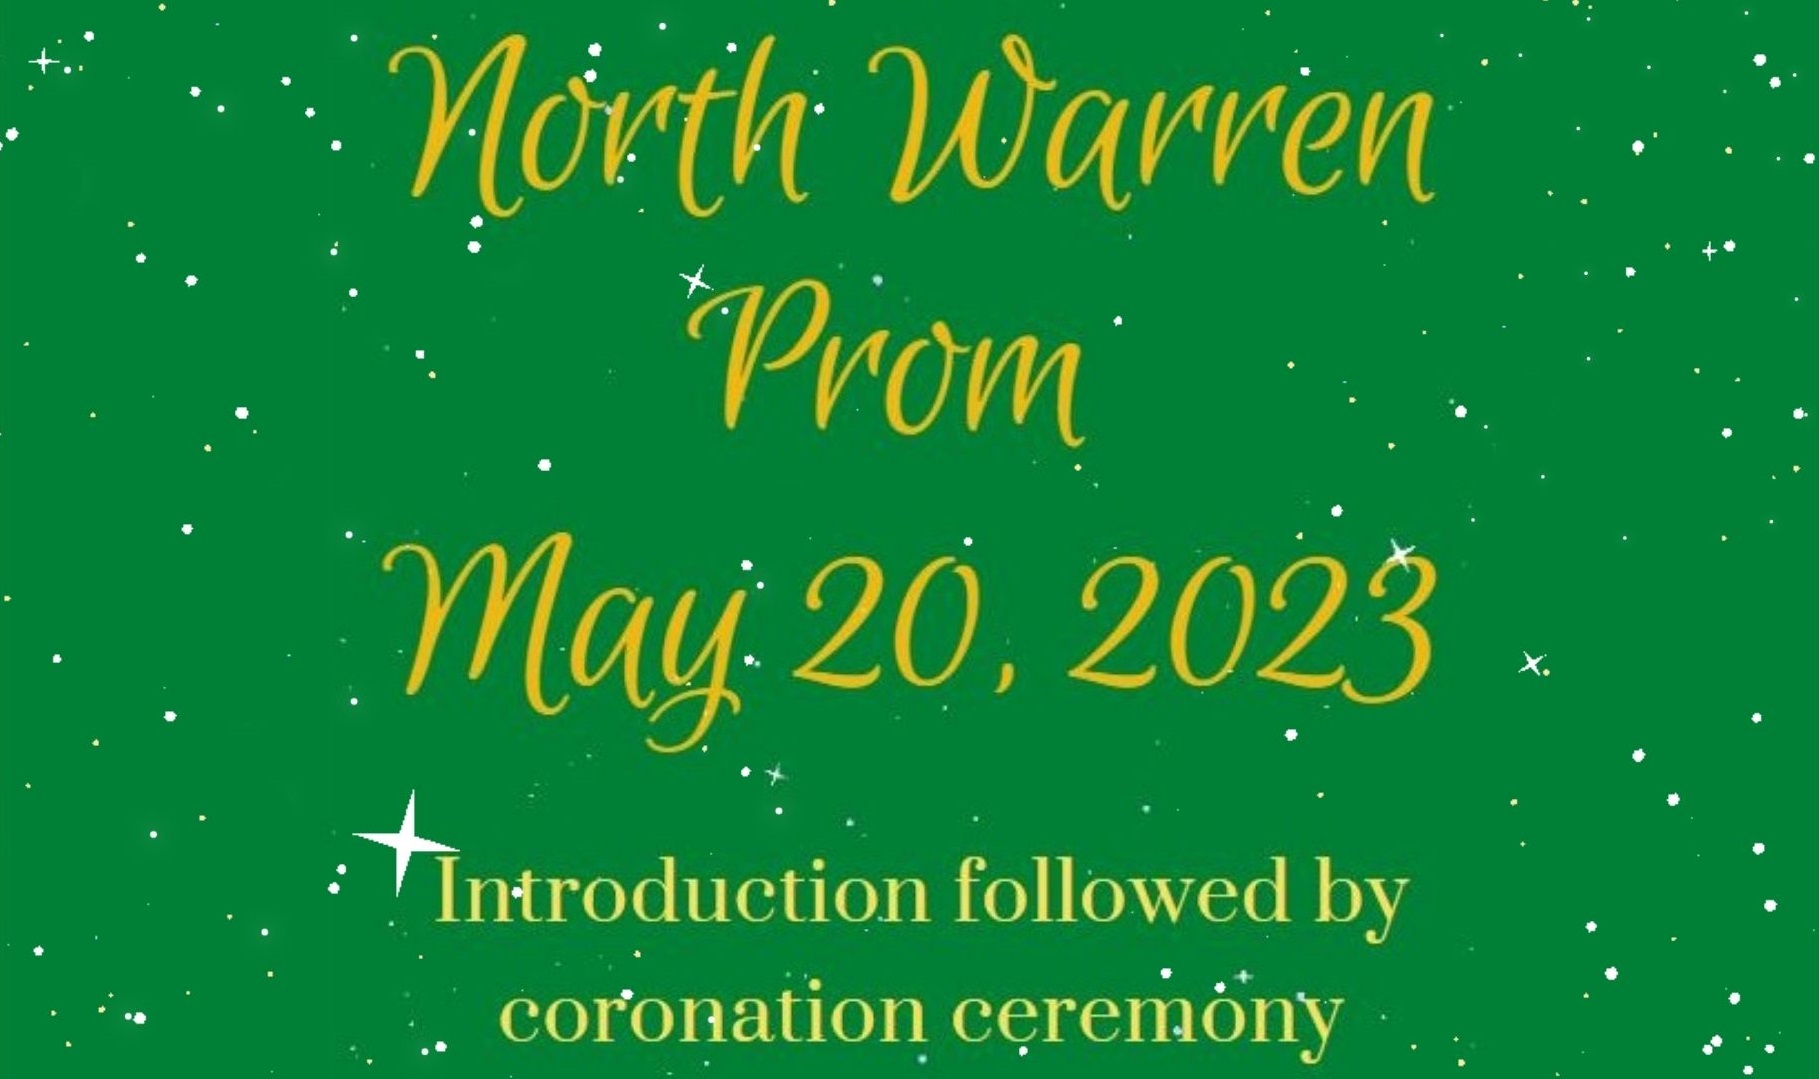 Click to watch the Prom Introduction & Coronation video.